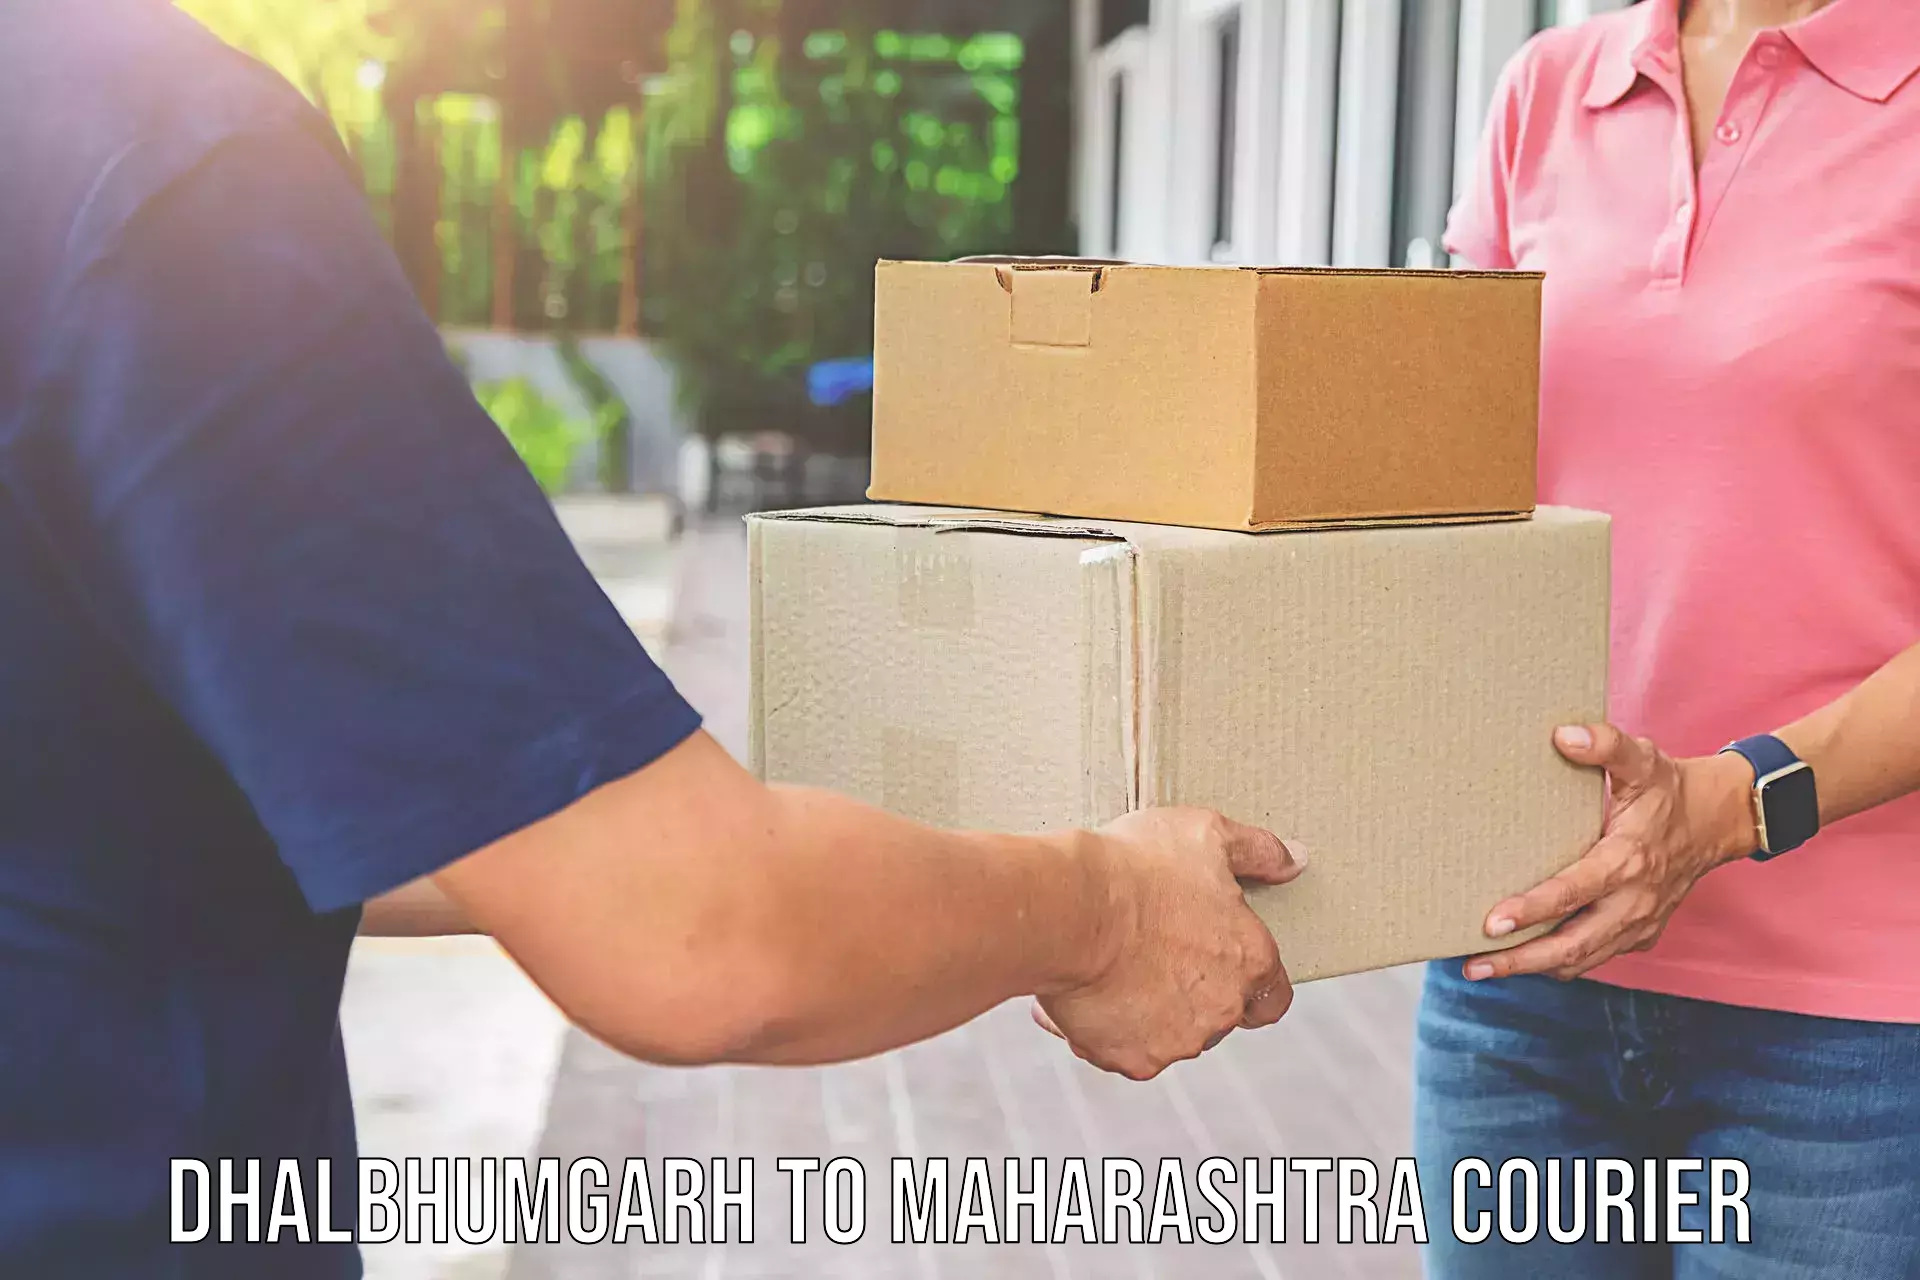 Moving and storage services Dhalbhumgarh to Solapur